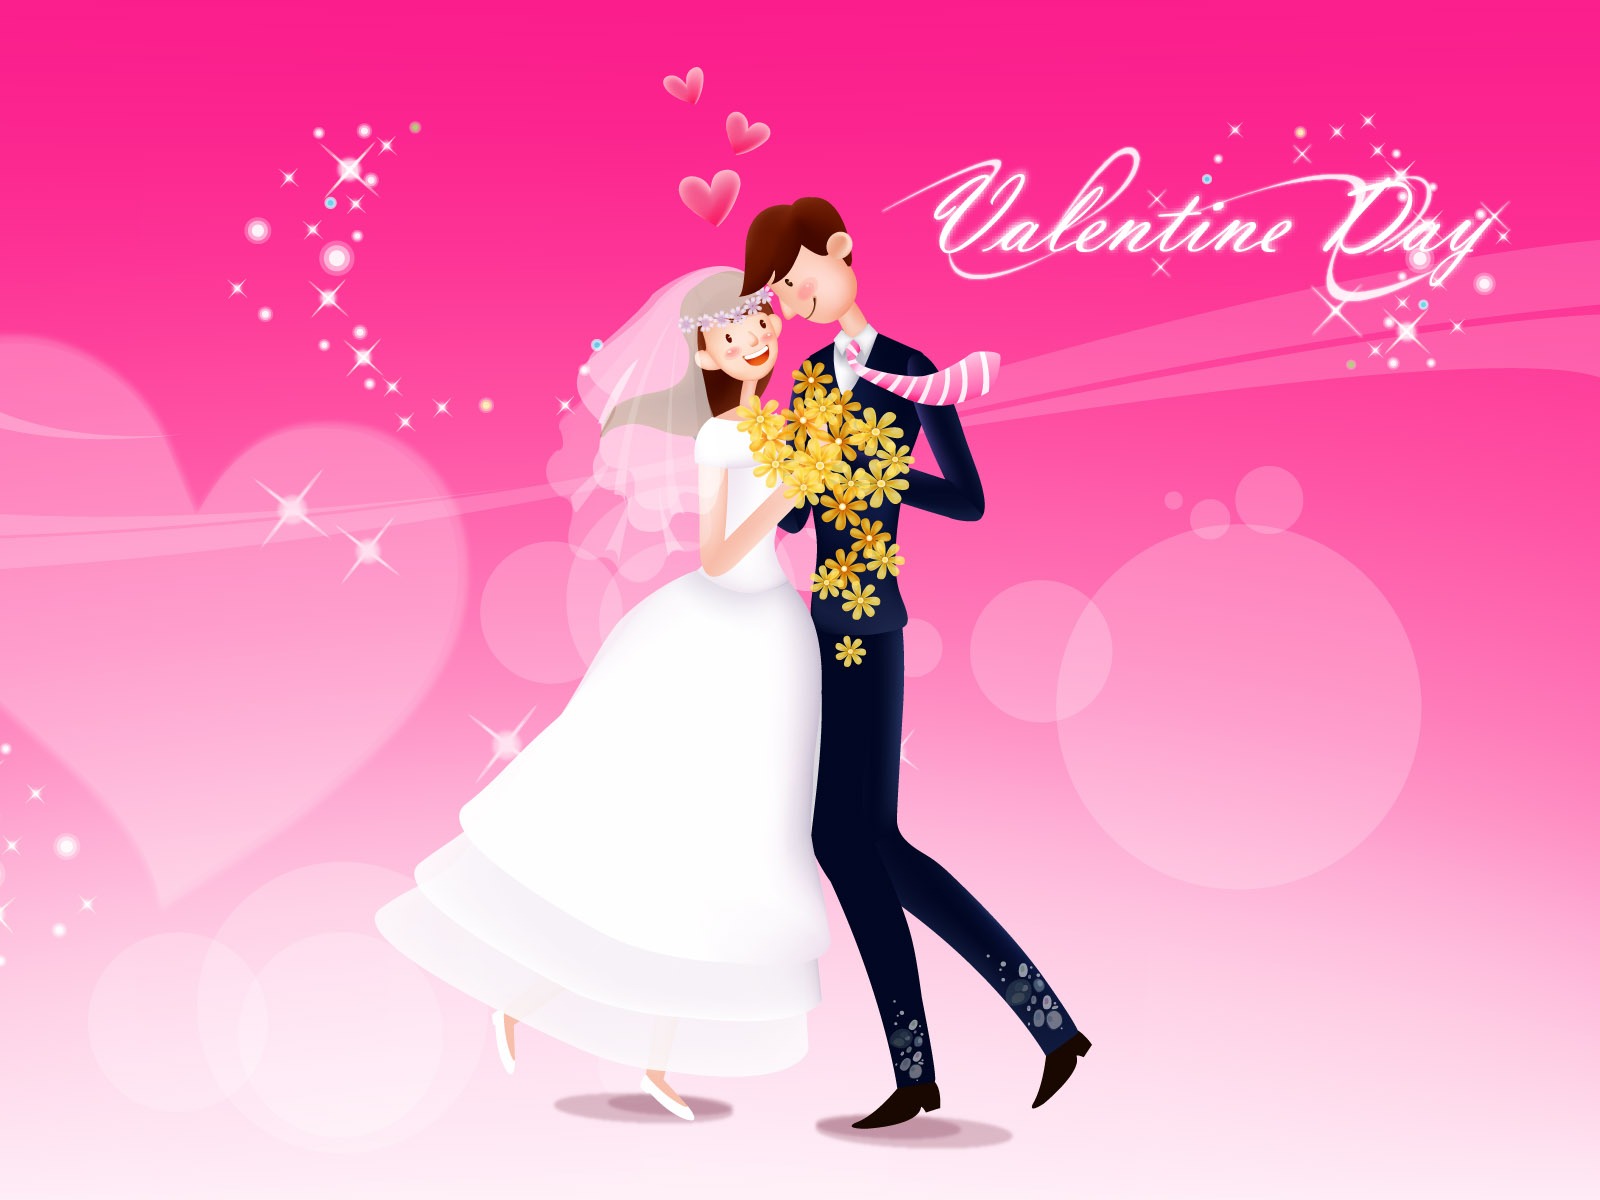 Valentine's Day Theme Wallpapers (2) #16 - 1600x1200